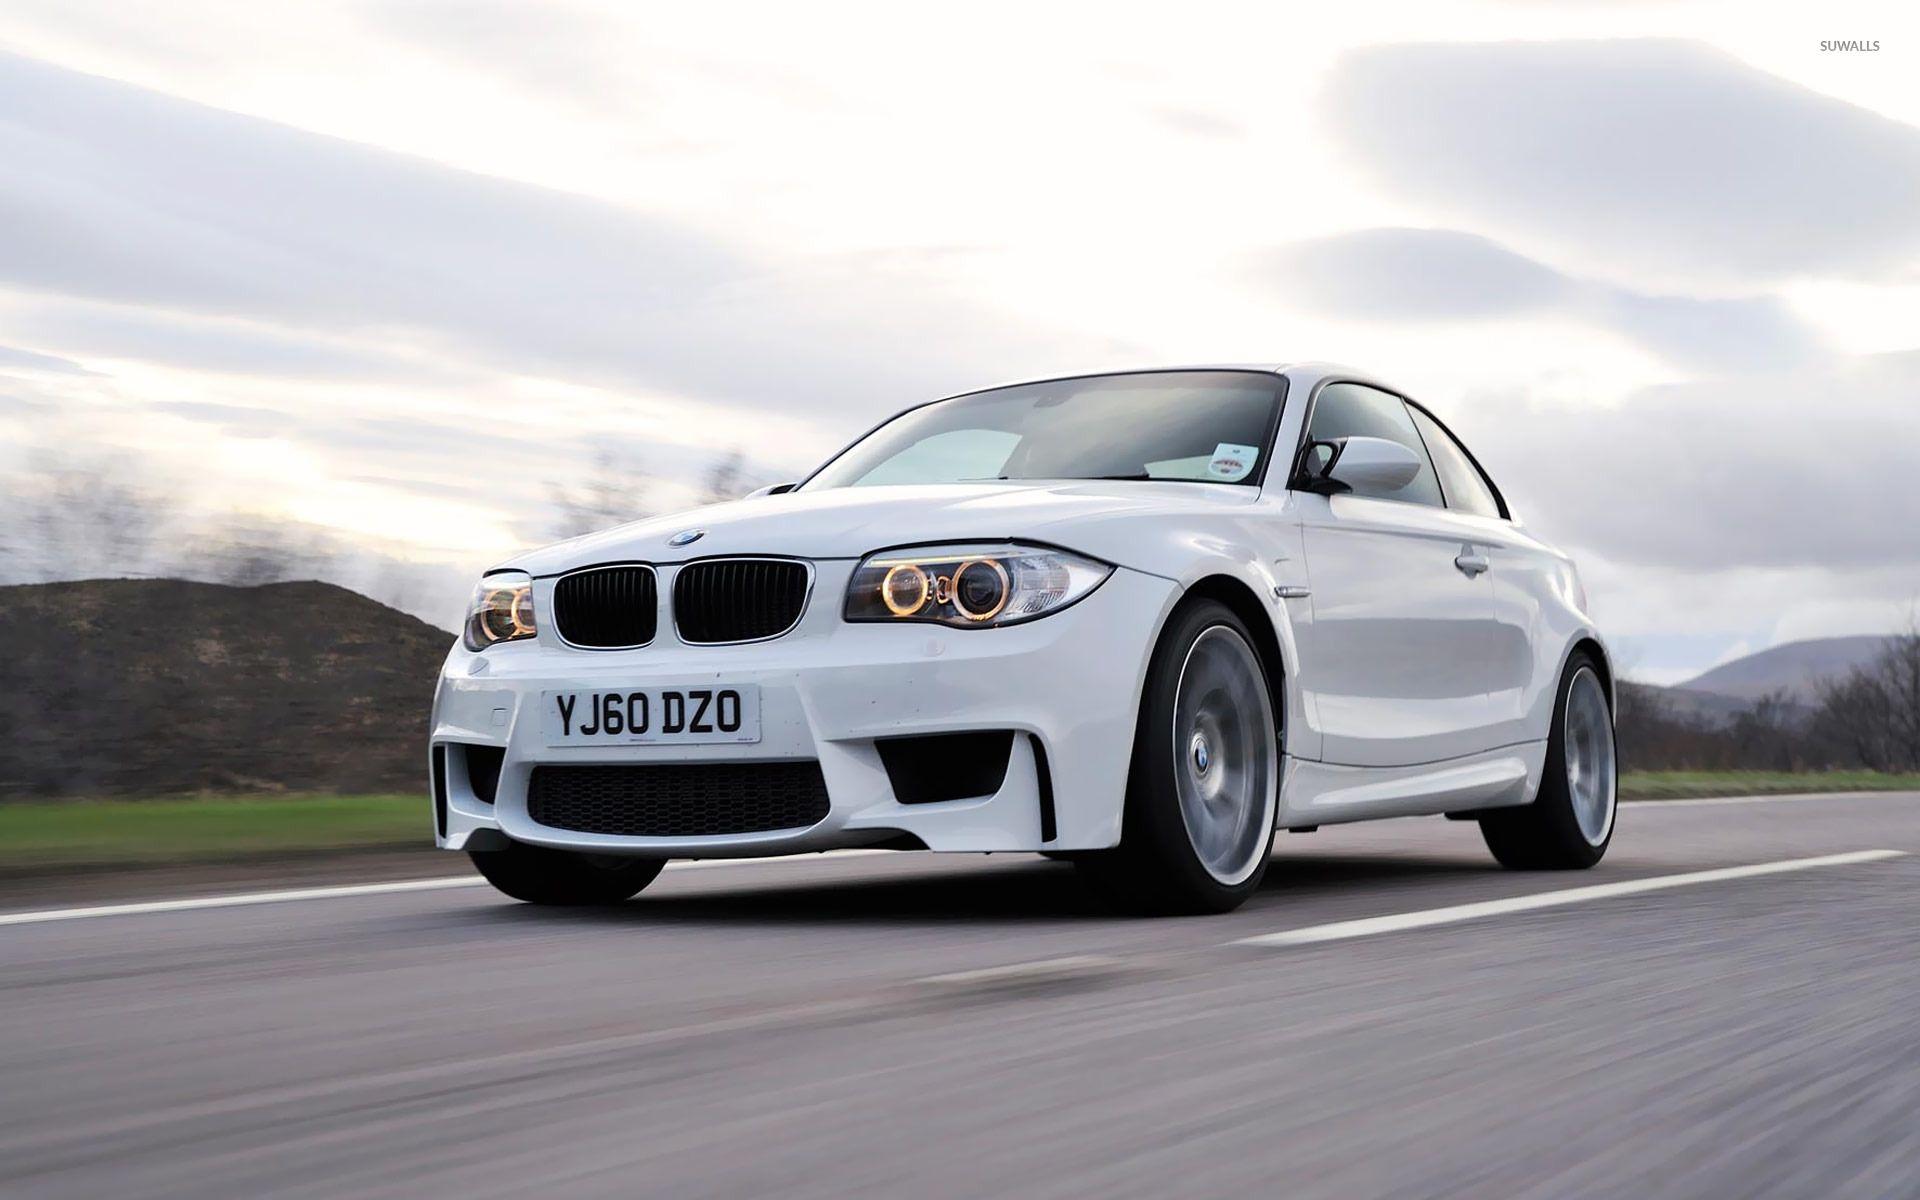 BMW 1 Series wallpaper by P3TR1T  Download on ZEDGE  006d